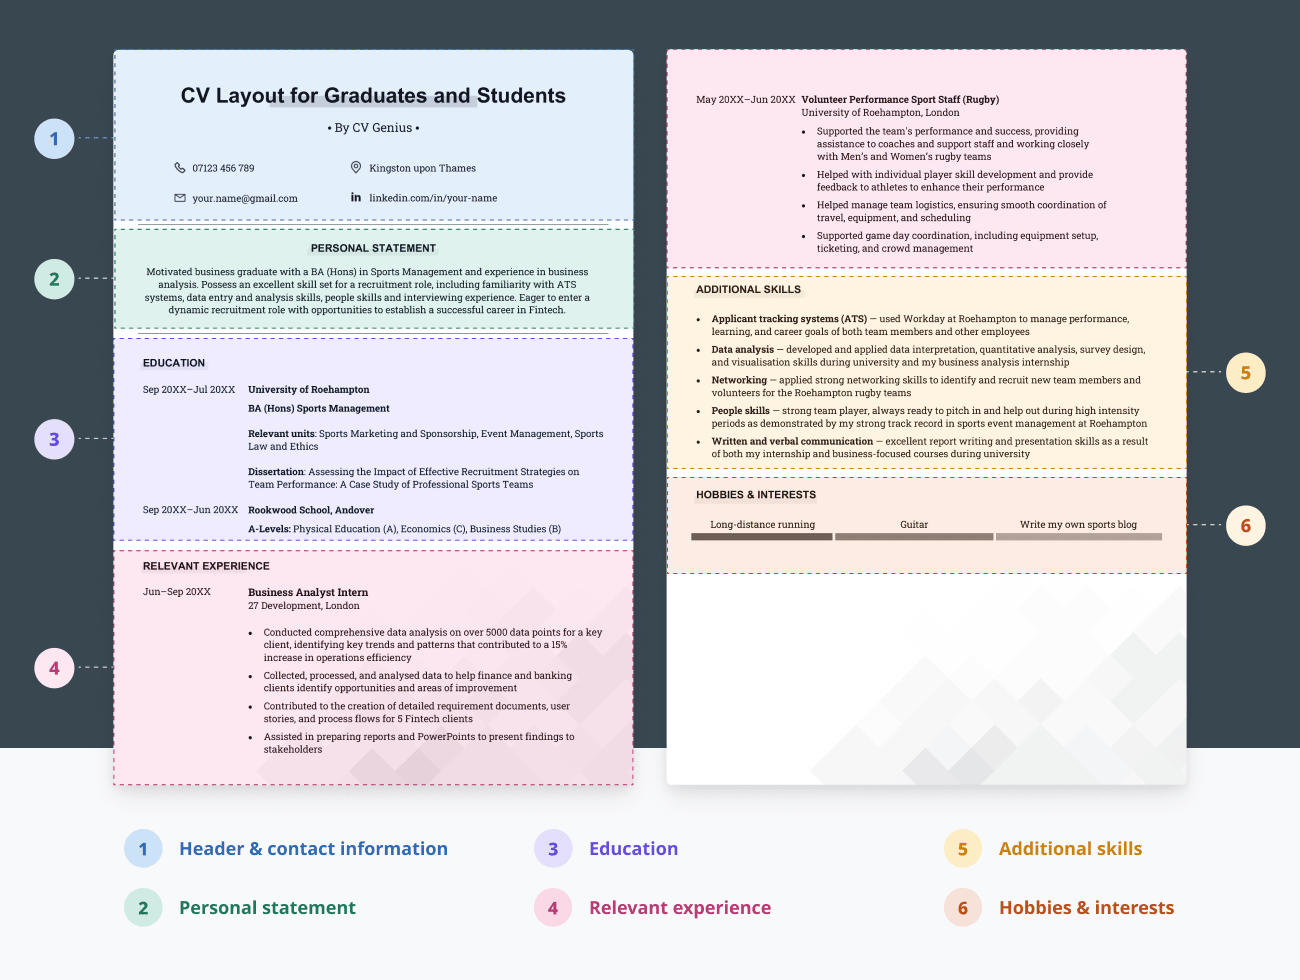 An example of how to layout a CV as a student or recent graduate. This CV layout outlines the applicant's education before their work experience.